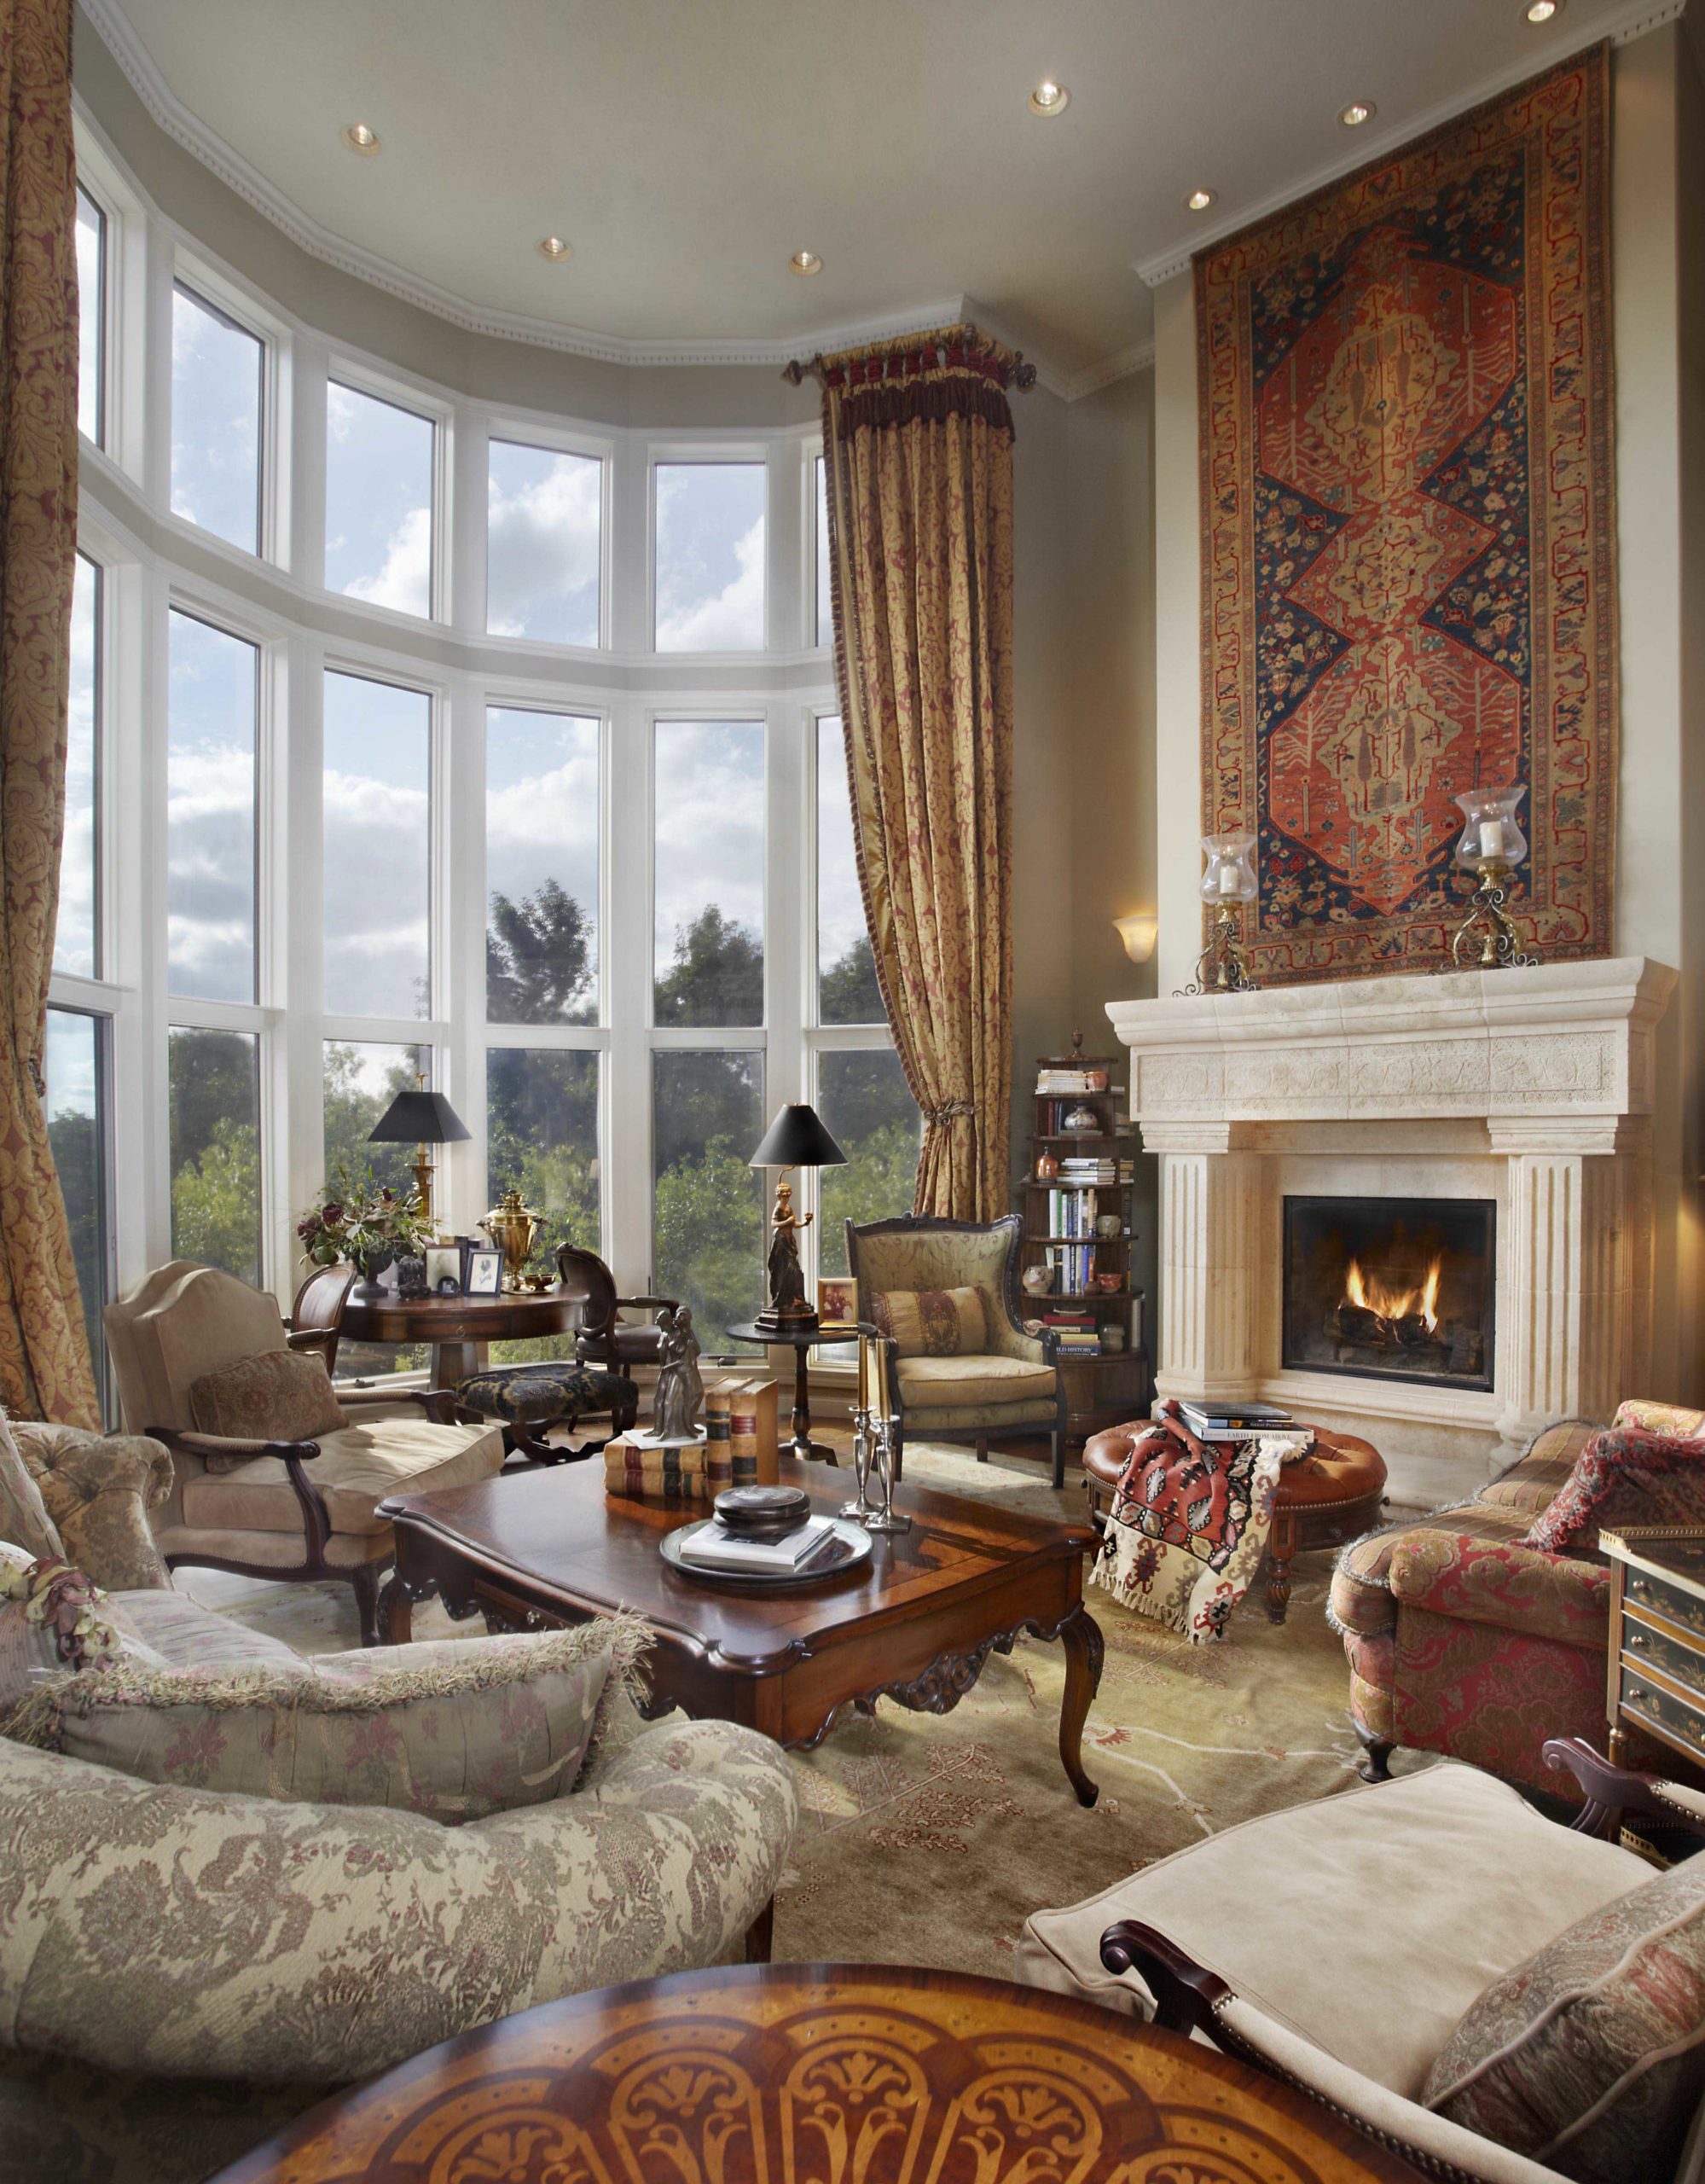 Bright living room with floor to ceiling windows and Persian accents